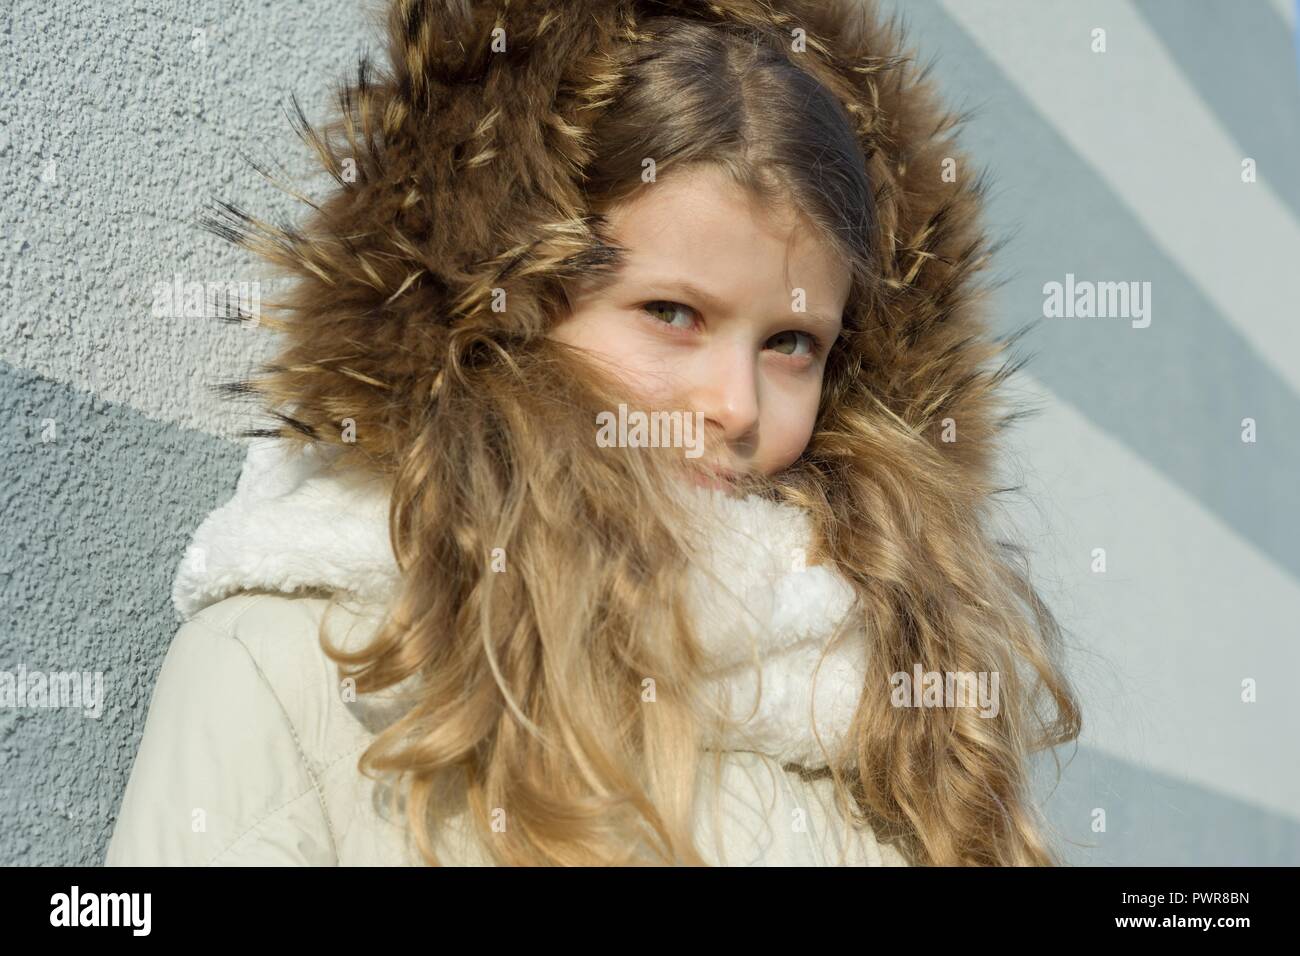 Close-up of an outdoor winter portrait of child, blonde girl with curly hair of 7,8 years in fur hood. Stock Photo